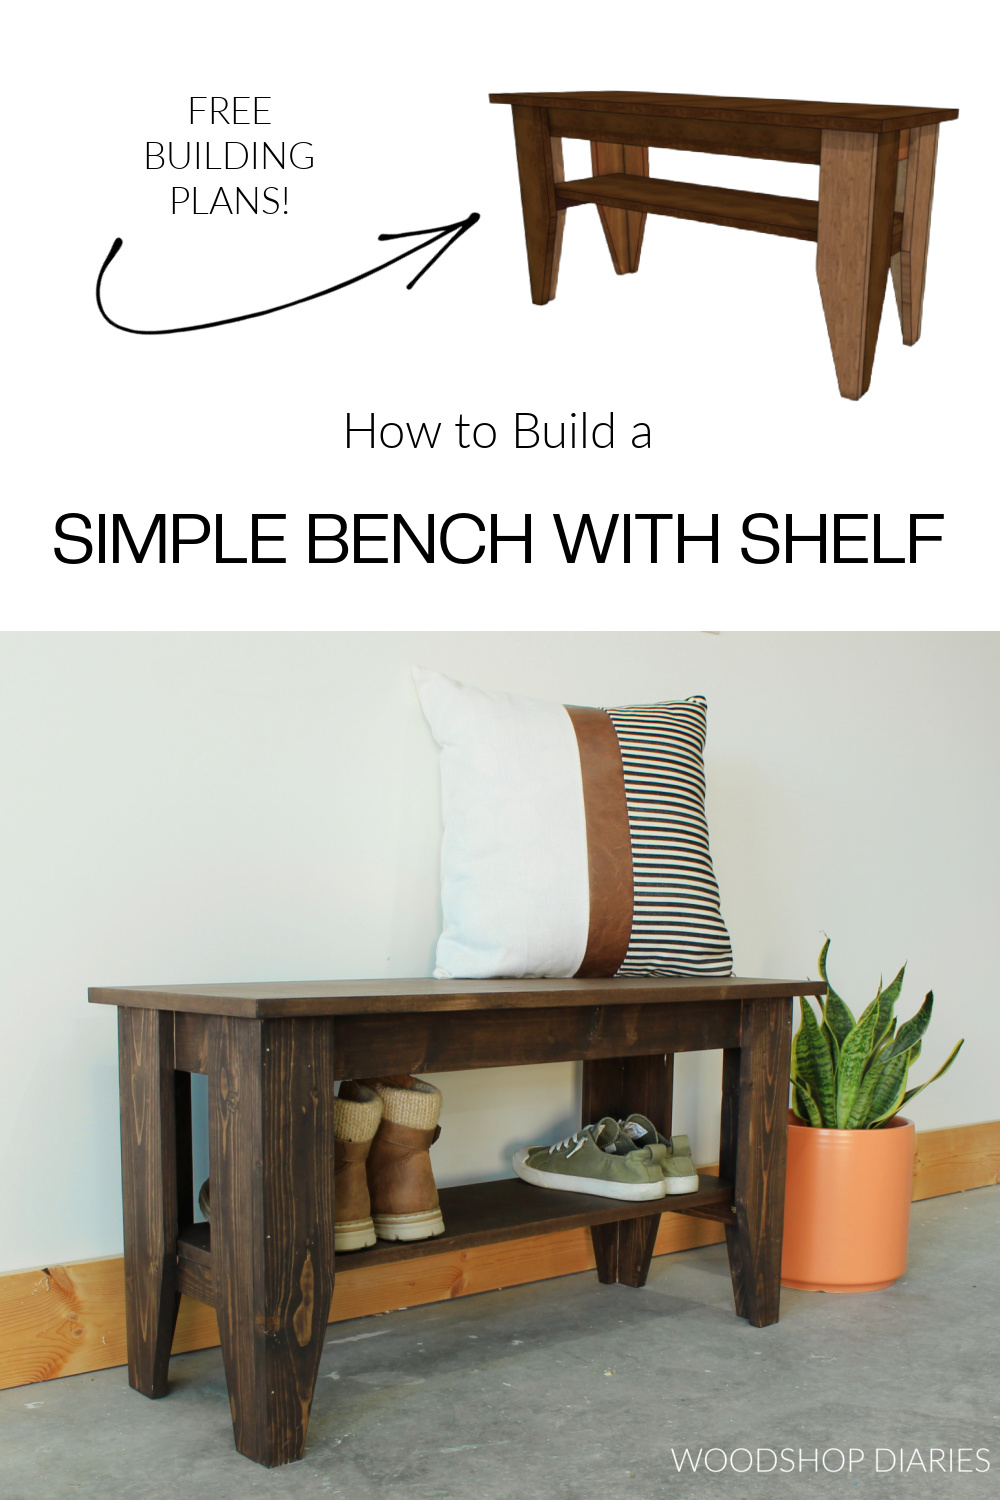 Pinterest collage image showing computer diagram drawing of completed bench at top and real life image of completed bench at bottom with text "how to build a simple bench with shelf"